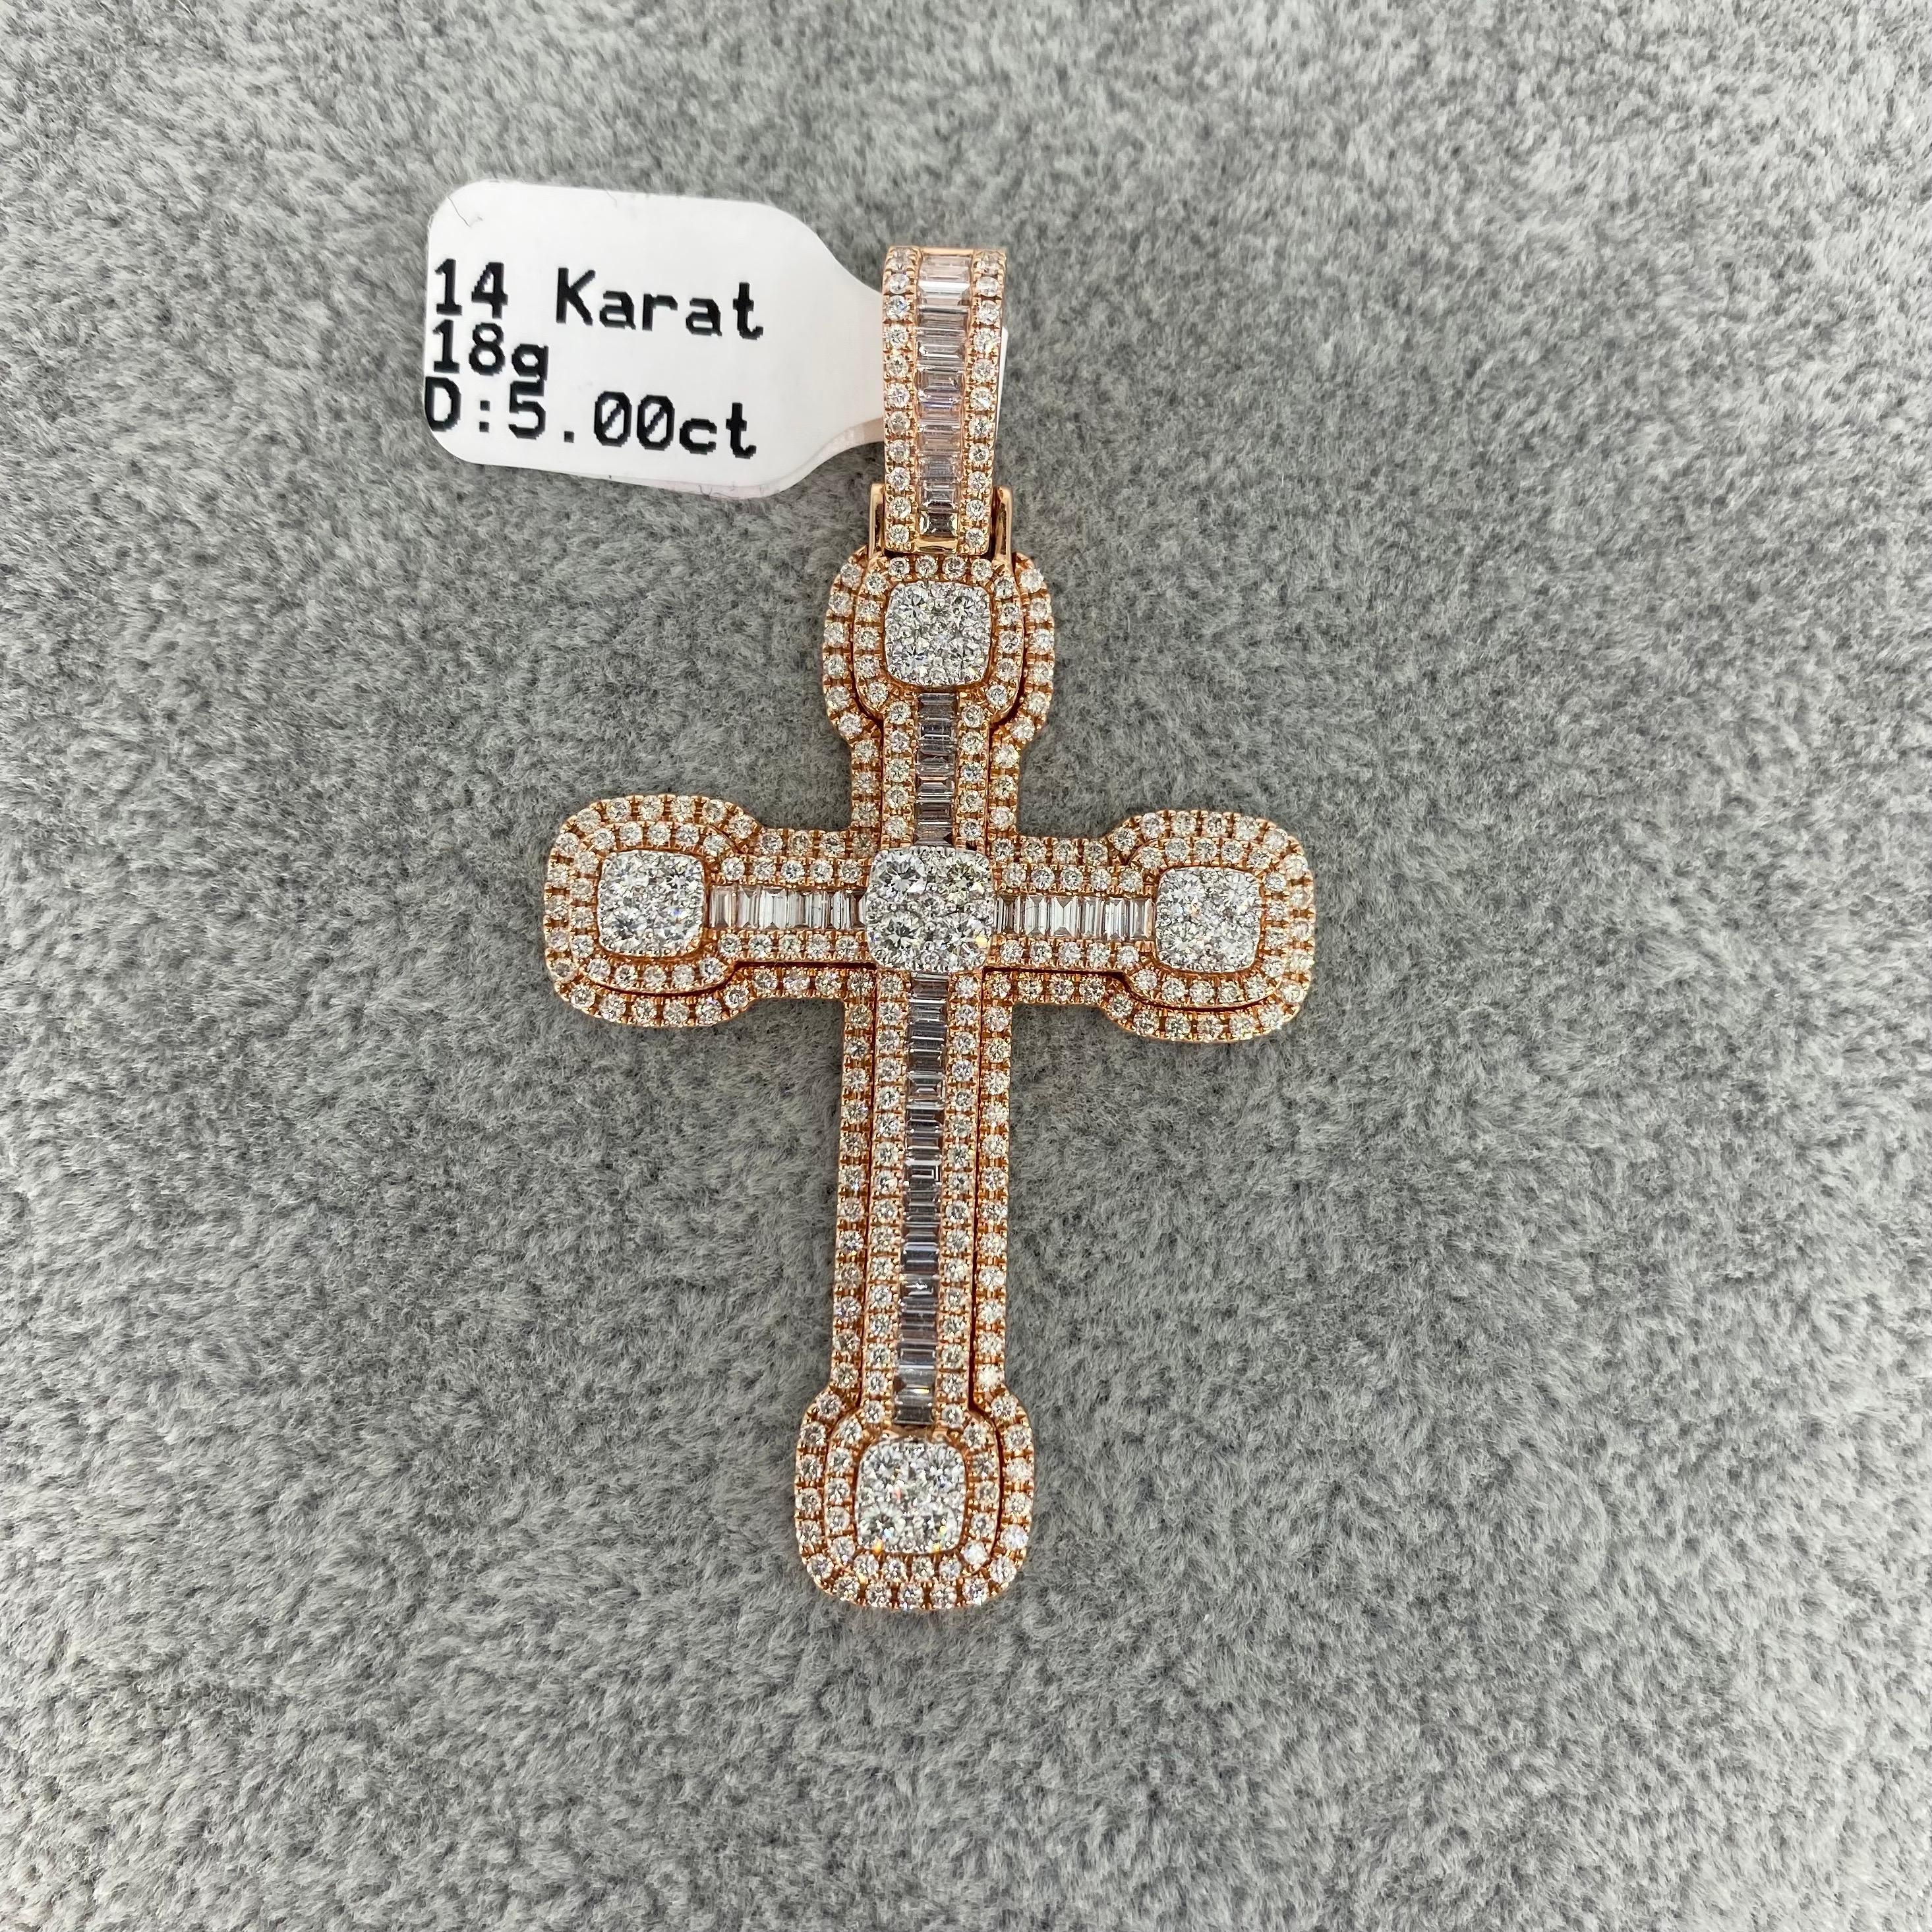 Cross 5.00 Carat Baguette & Round Diamonds Pendant 14k Rose Gold. Very high quality craftsmanship all handmade. The pendant measures 2.5 inches X 1.5 inches and weights 18 grams 14k rose gold. The Diamonds on this pendant include baguette cut at SI